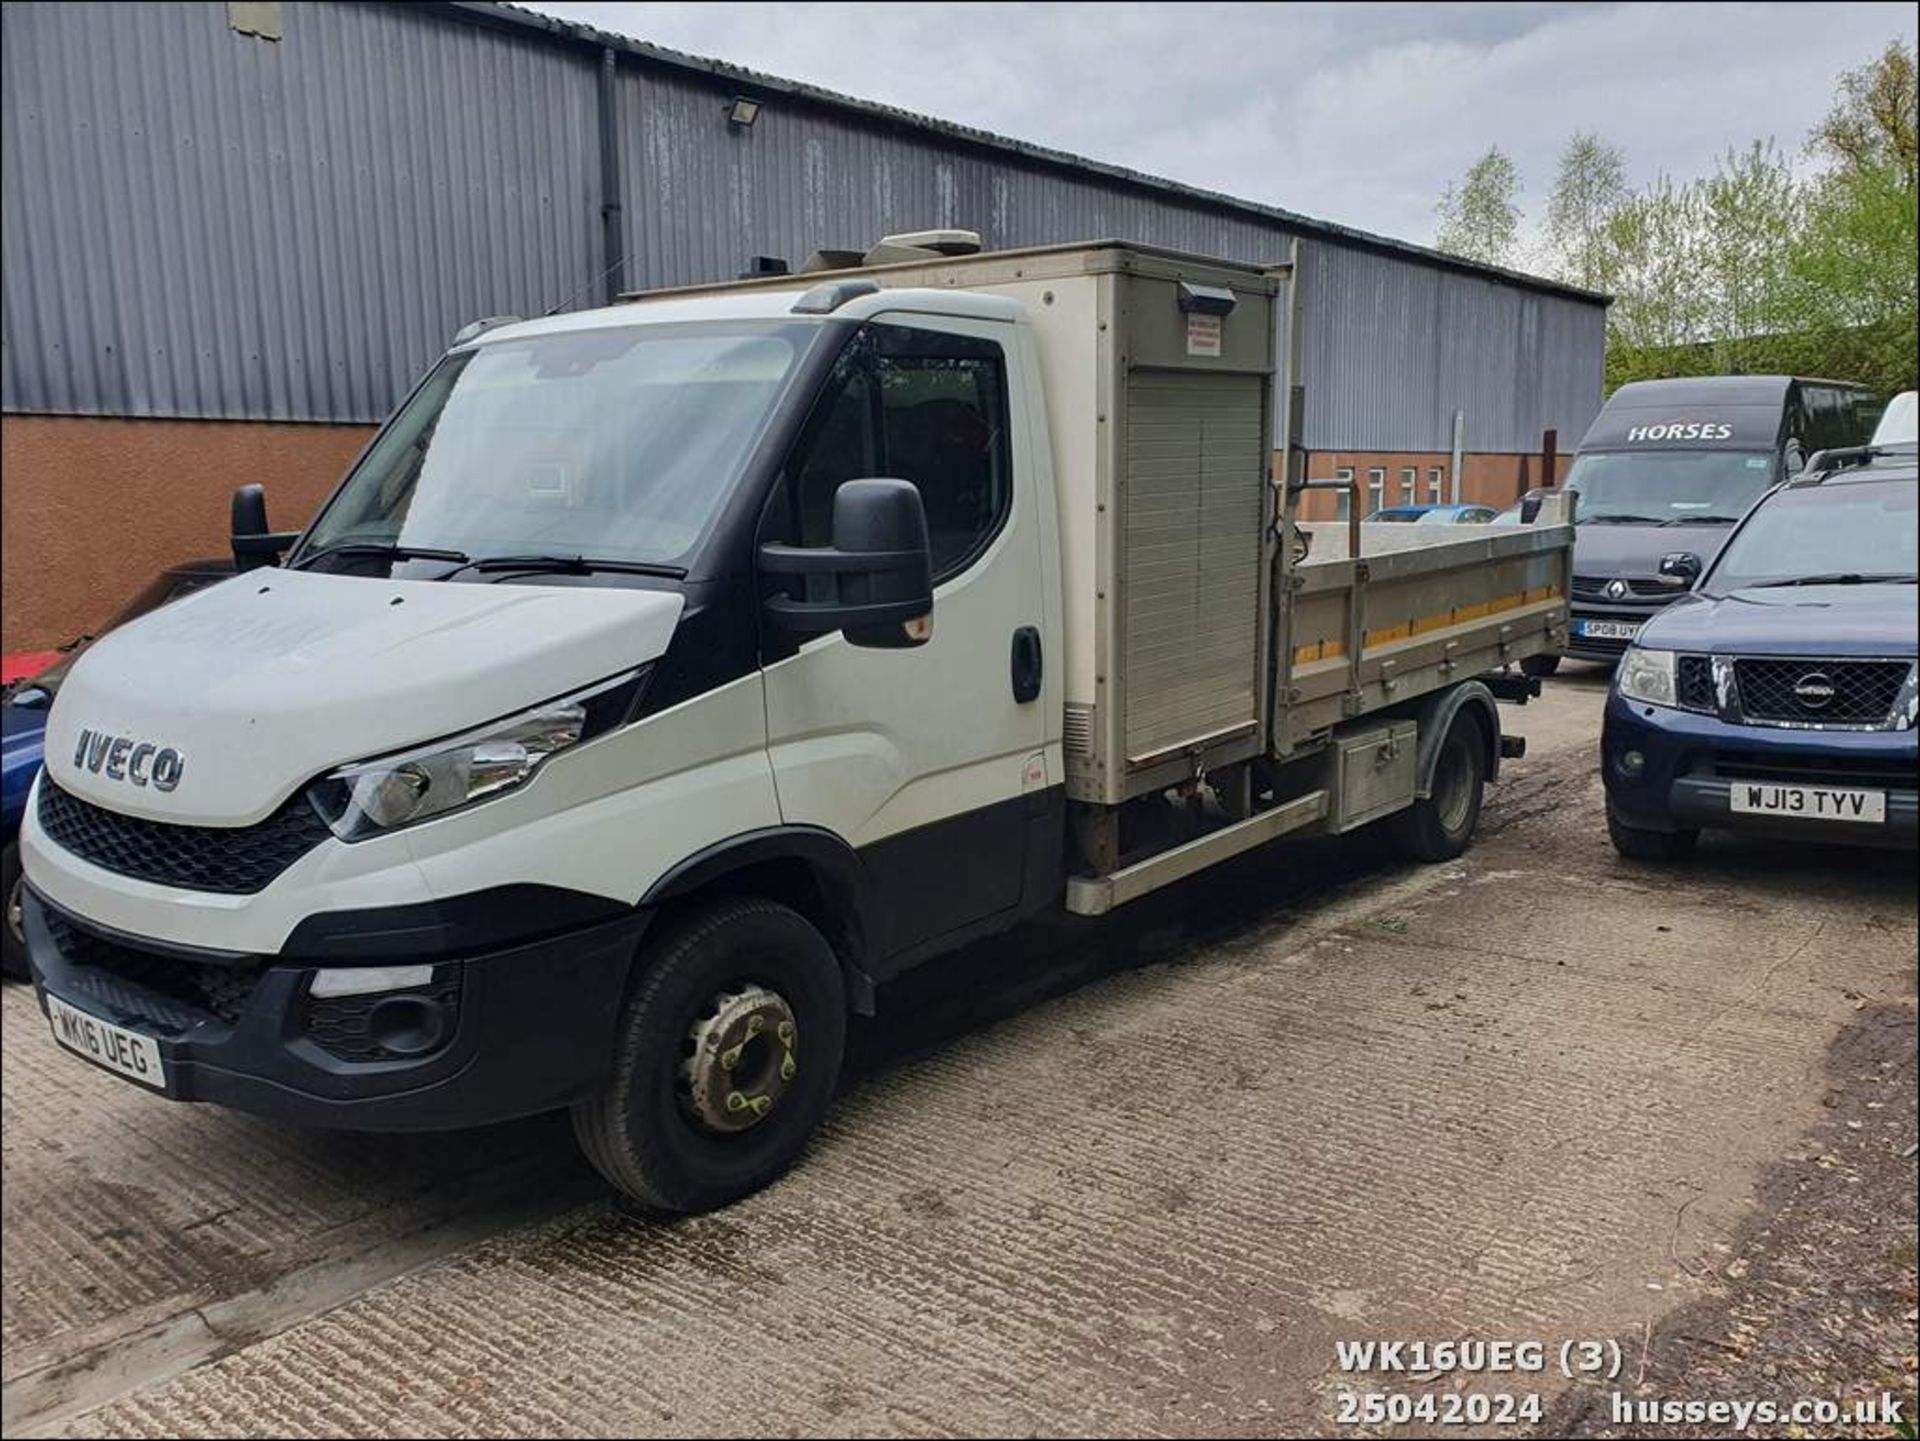 16/16 IVECO DAILY 70C17 - 2998cc 2dr Tipper (White, 193k) - Image 7 of 28